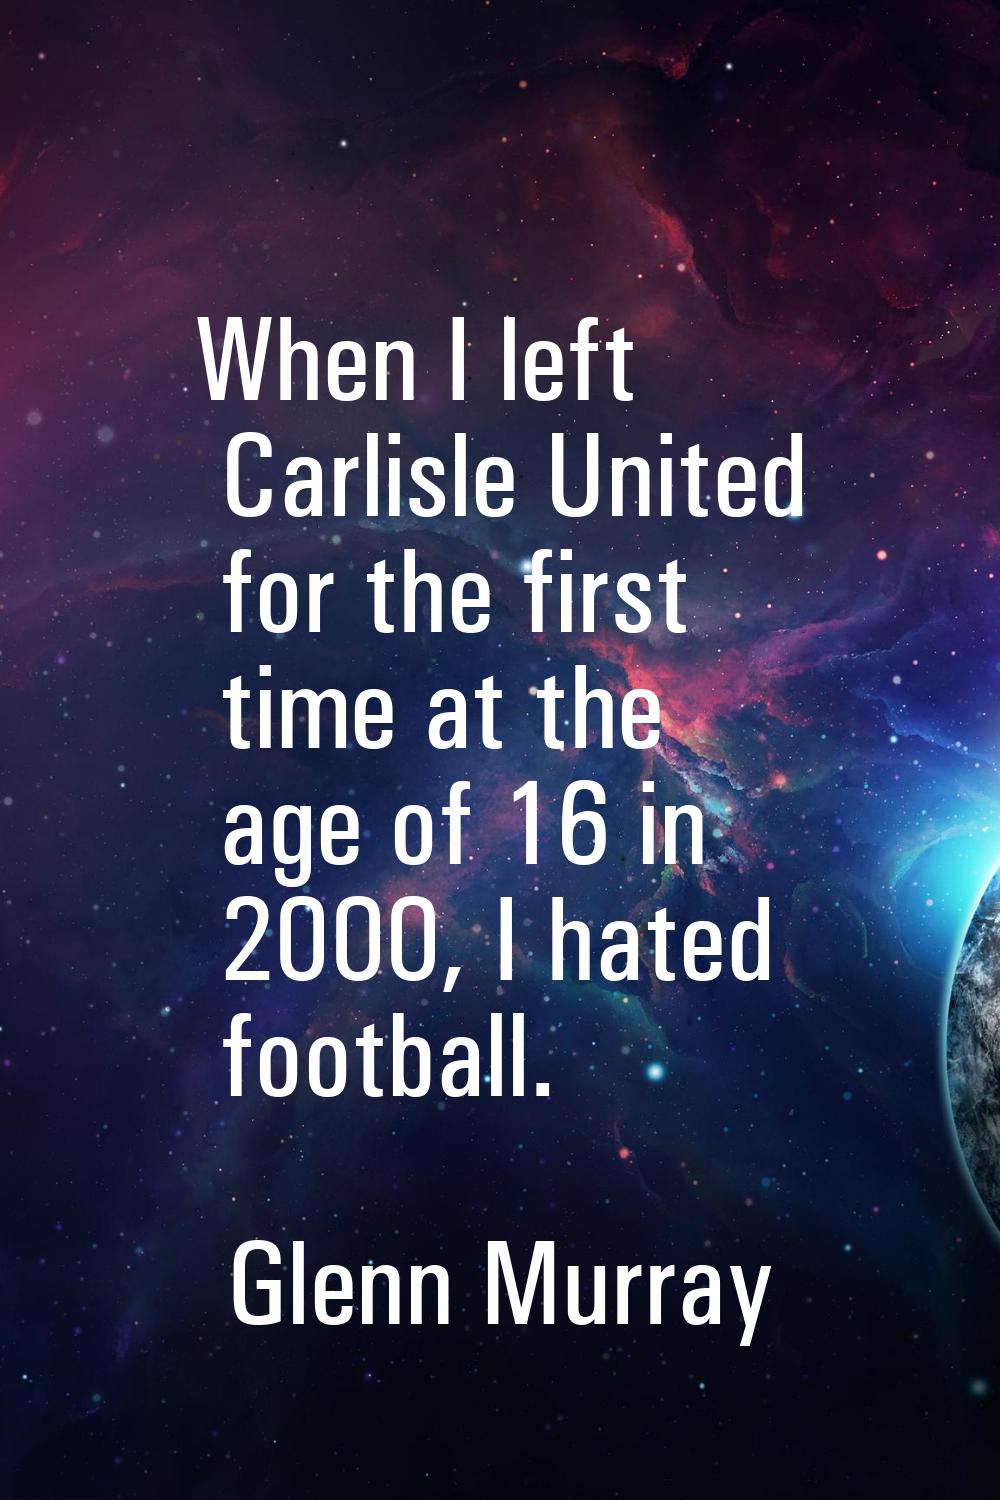 When I left Carlisle United for the first time at the age of 16 in 2000, I hated football.